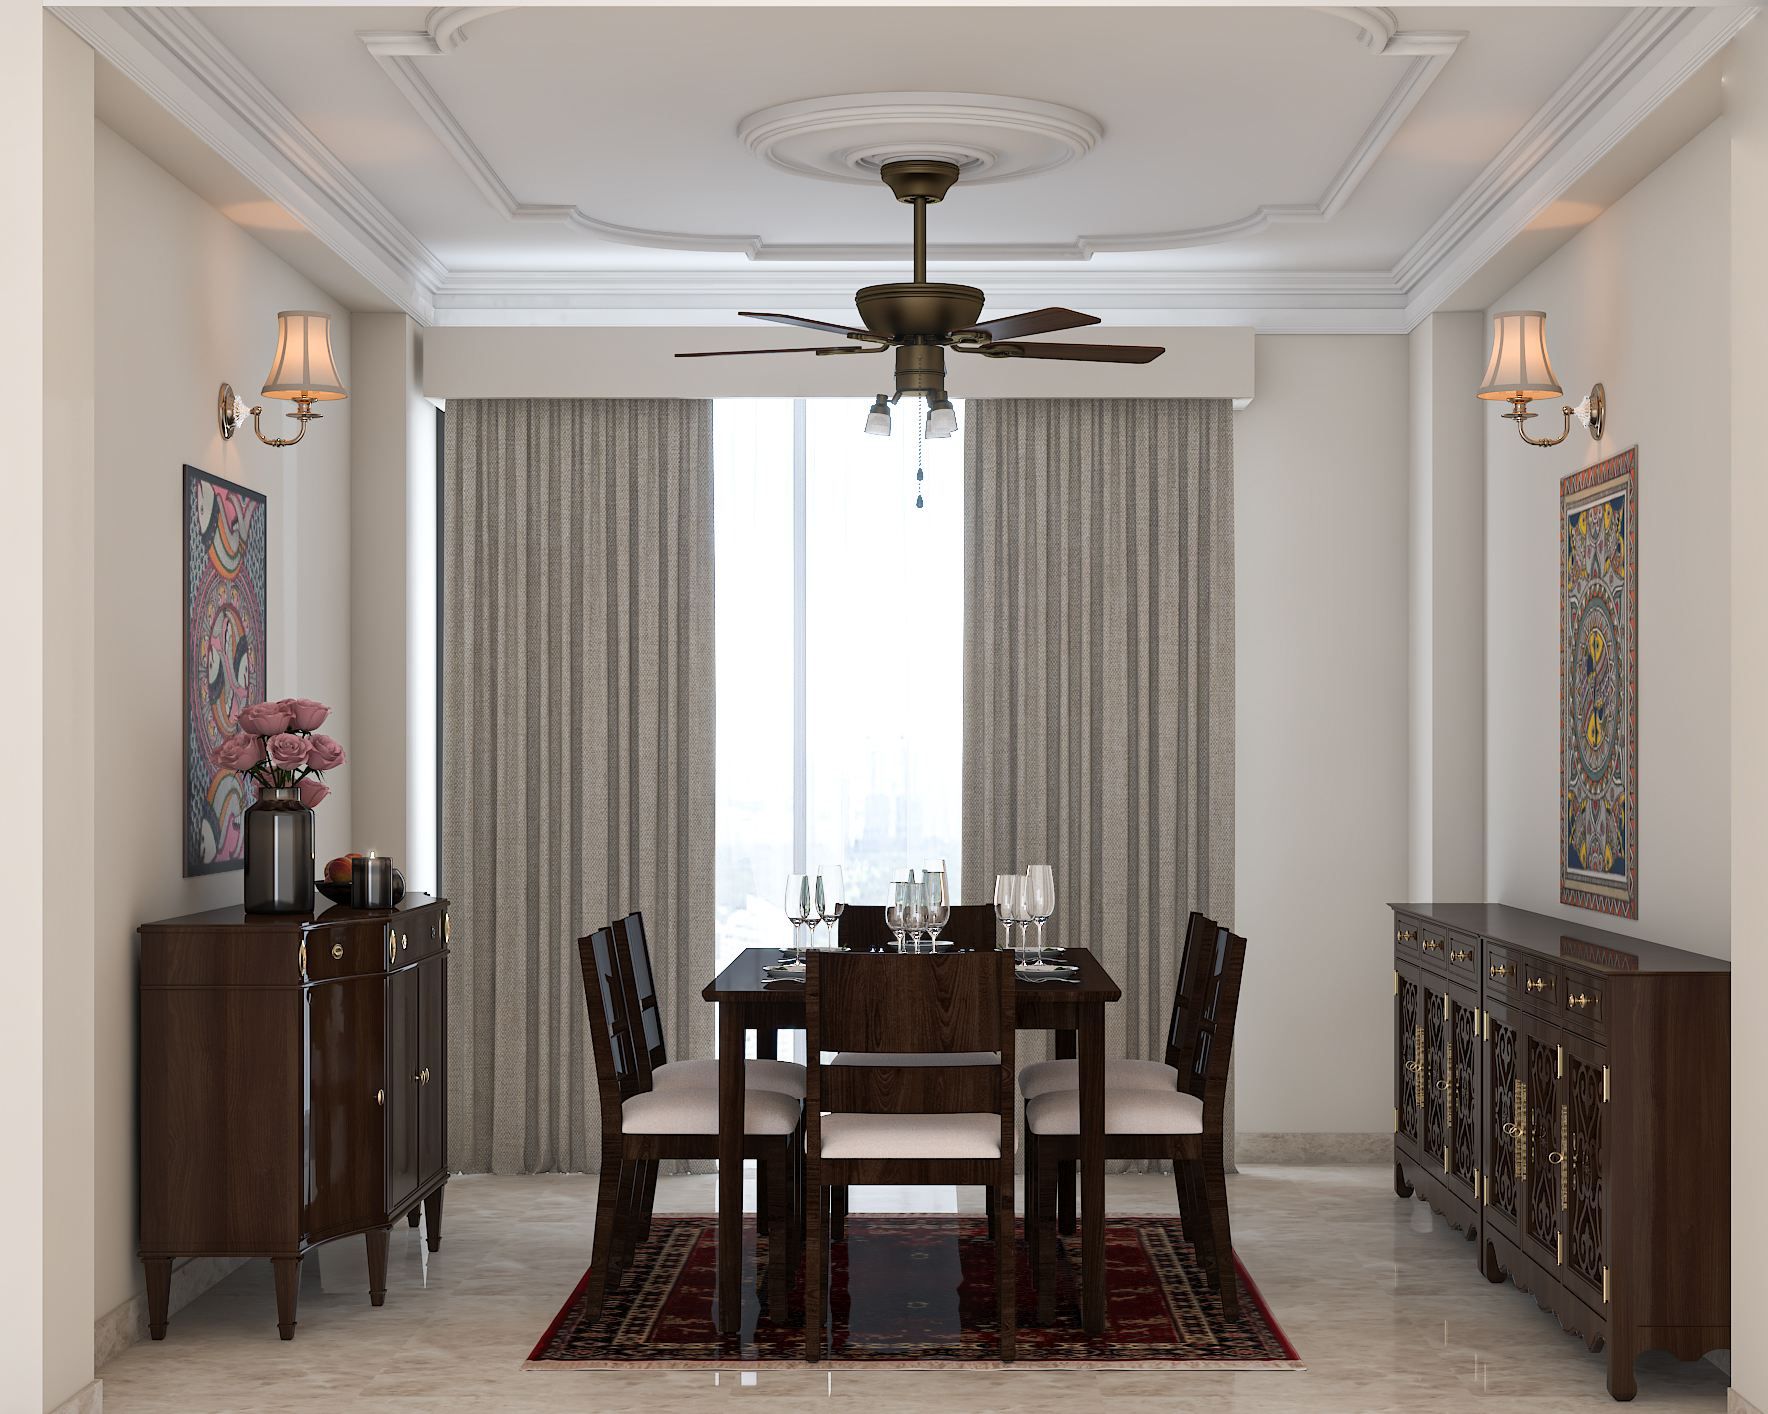 Antique Styled Spacious Dining Room Design